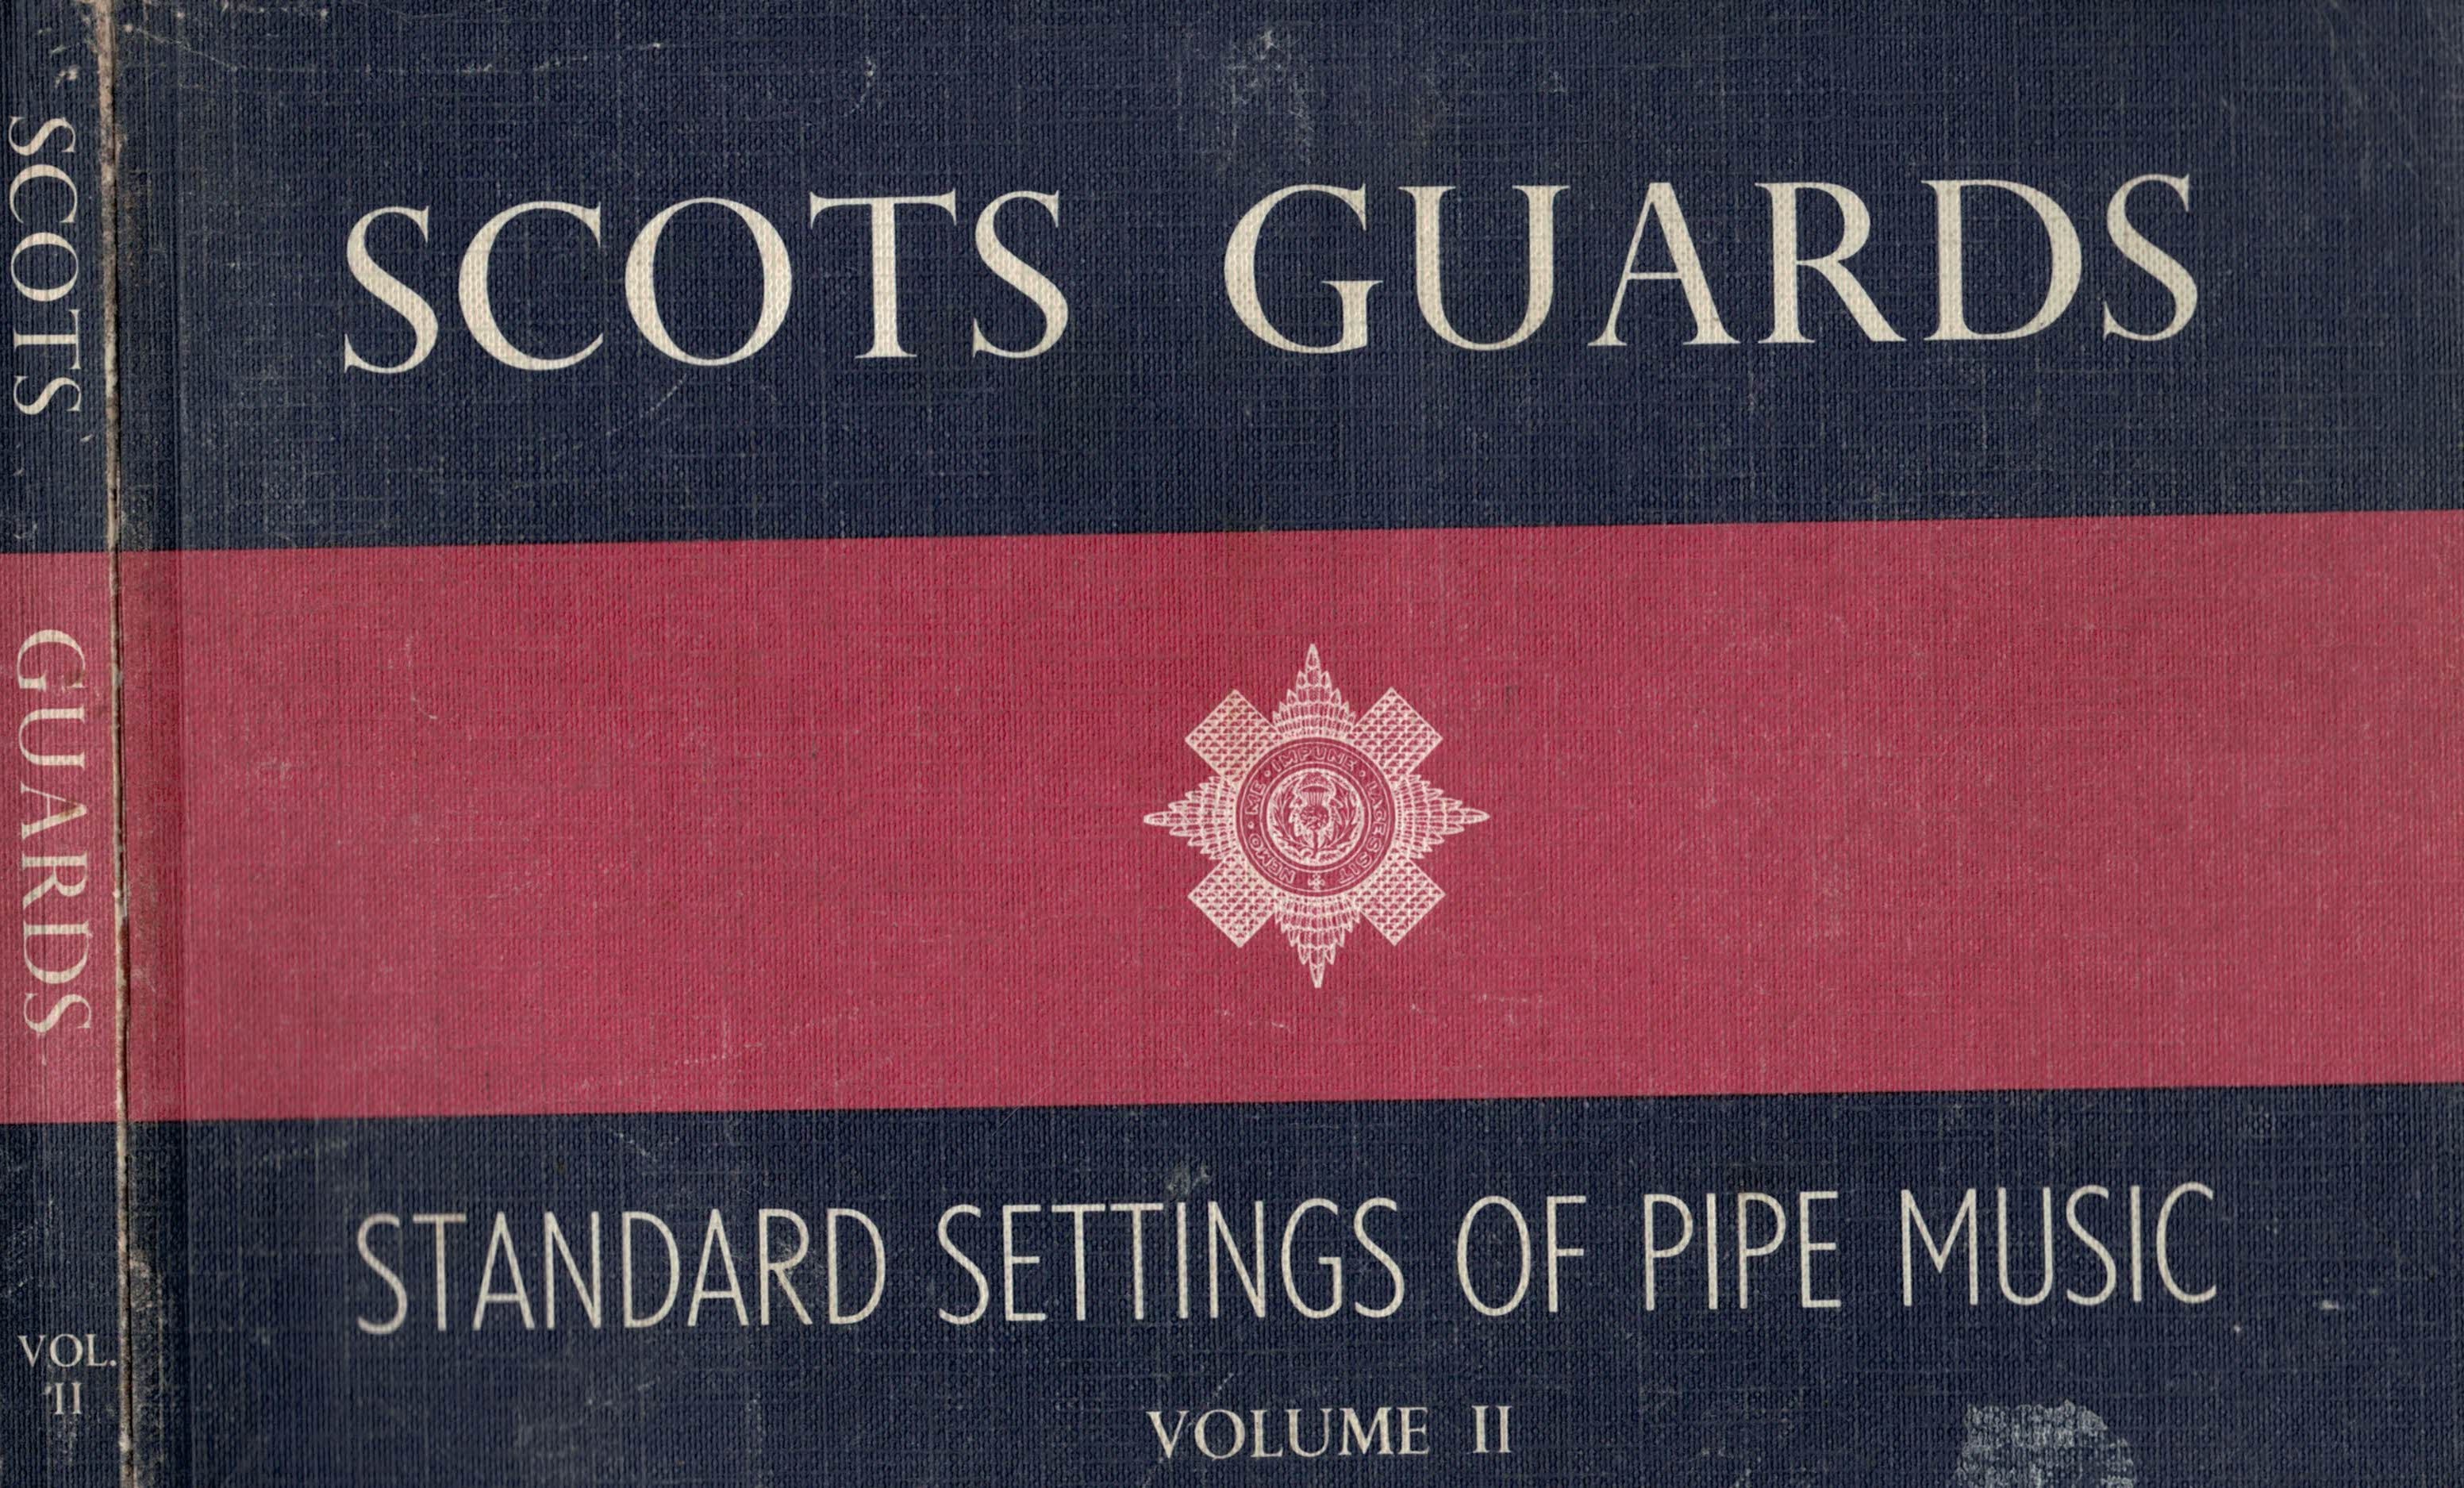 Scots Guards. Standard Settings of Pipe Music. Volume II.